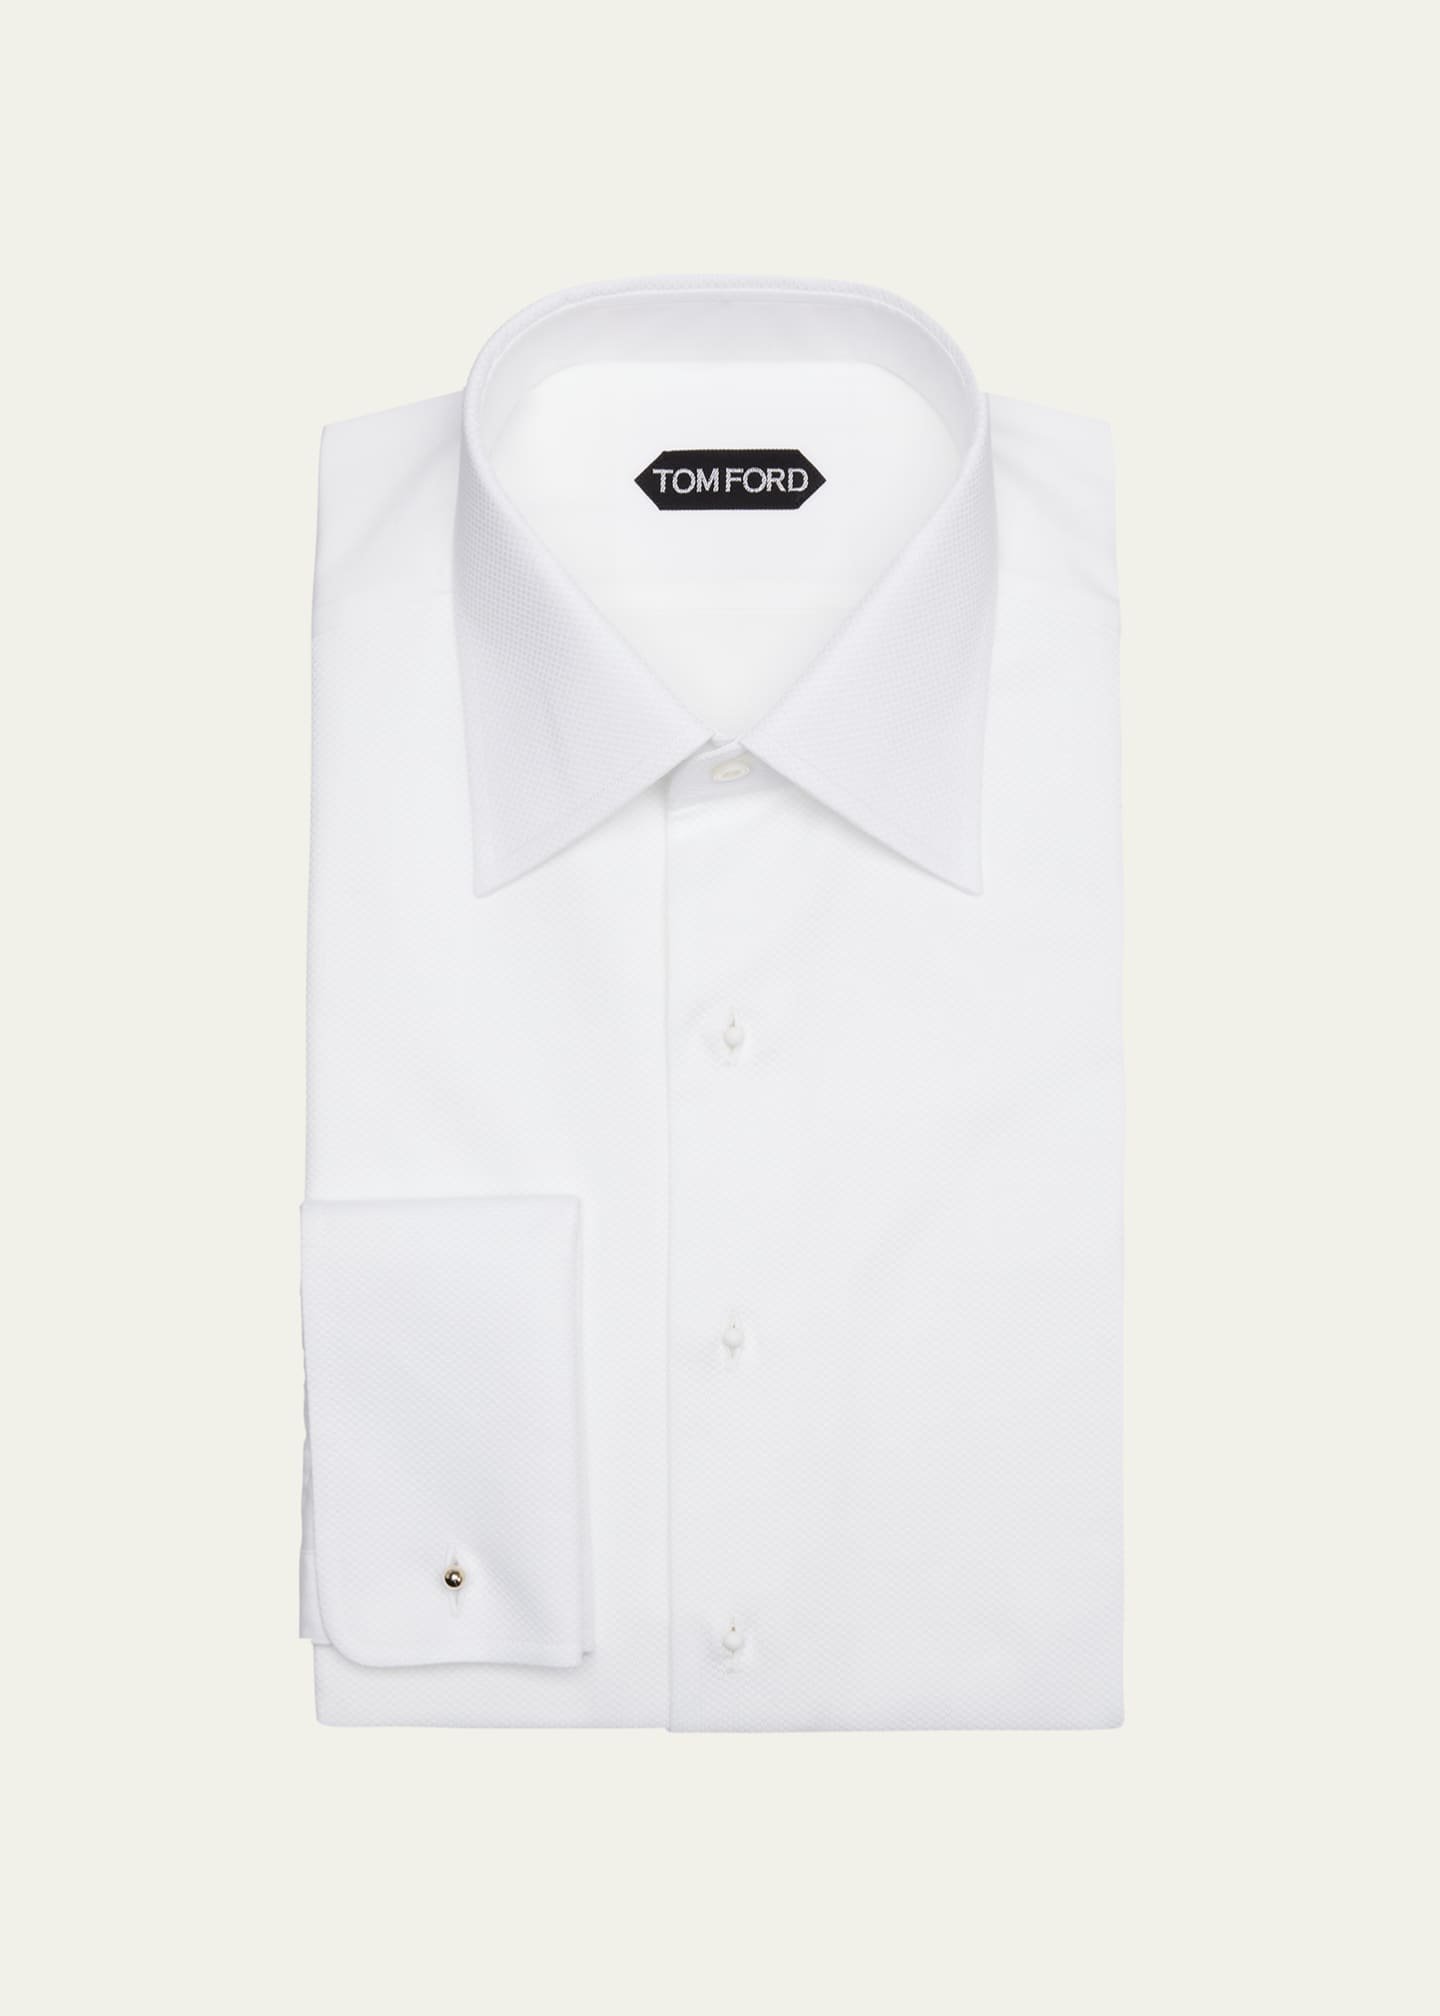 TOM FORD Men's Cotton Piqué Dress Shirt with French Cuffs - Bergdorf ...